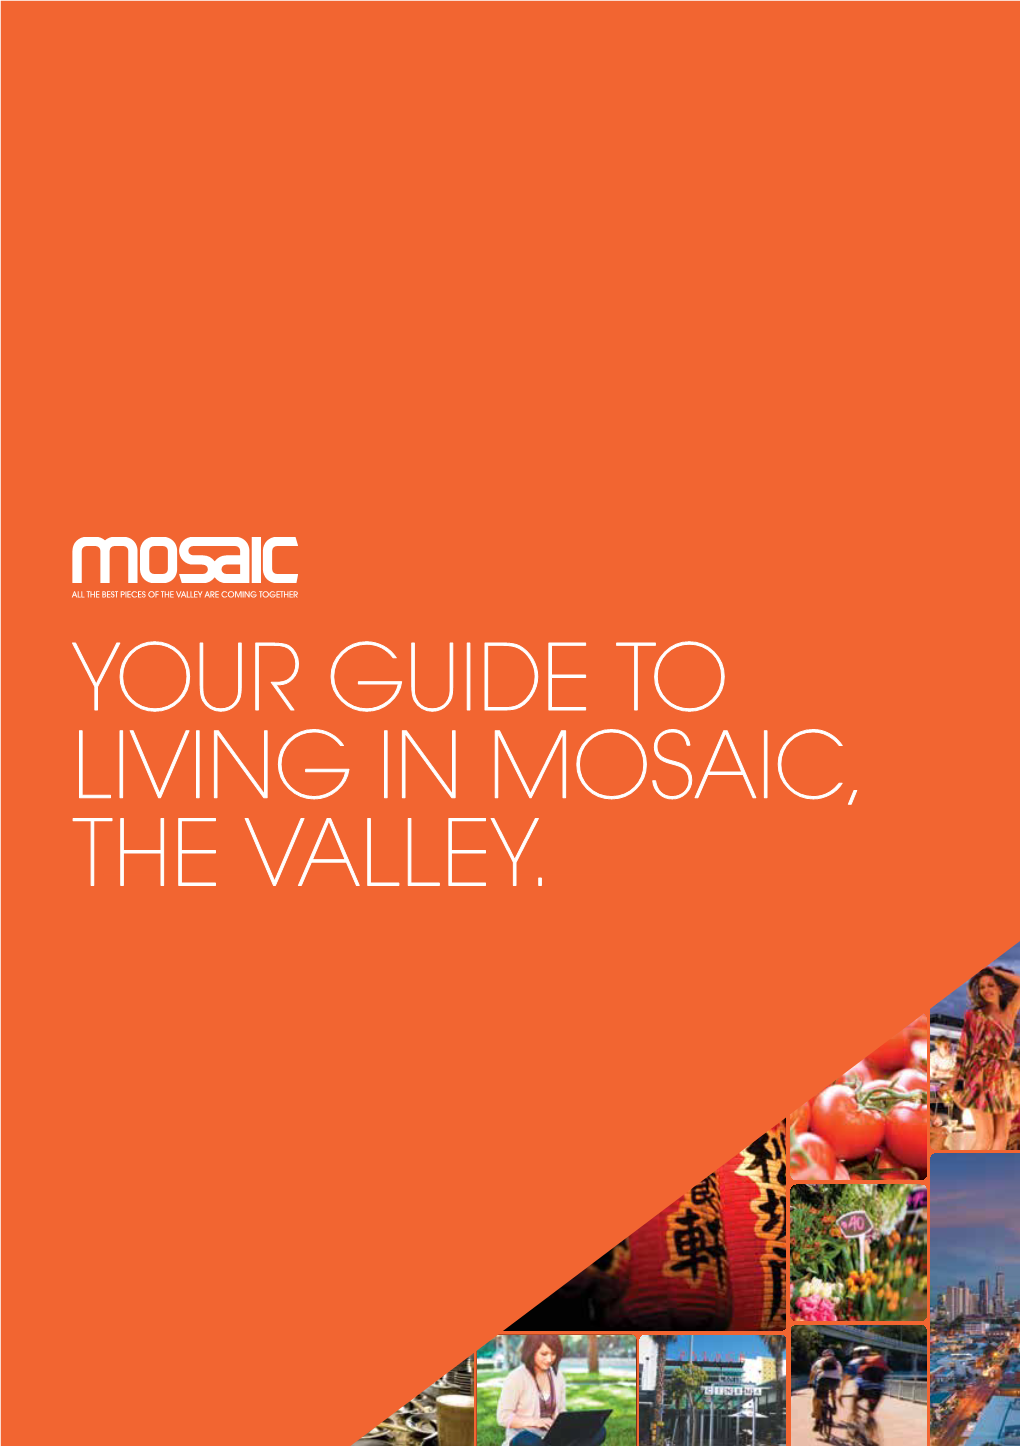 Your Guide to Living in Mosaic, the Valley. Letter from Gavin